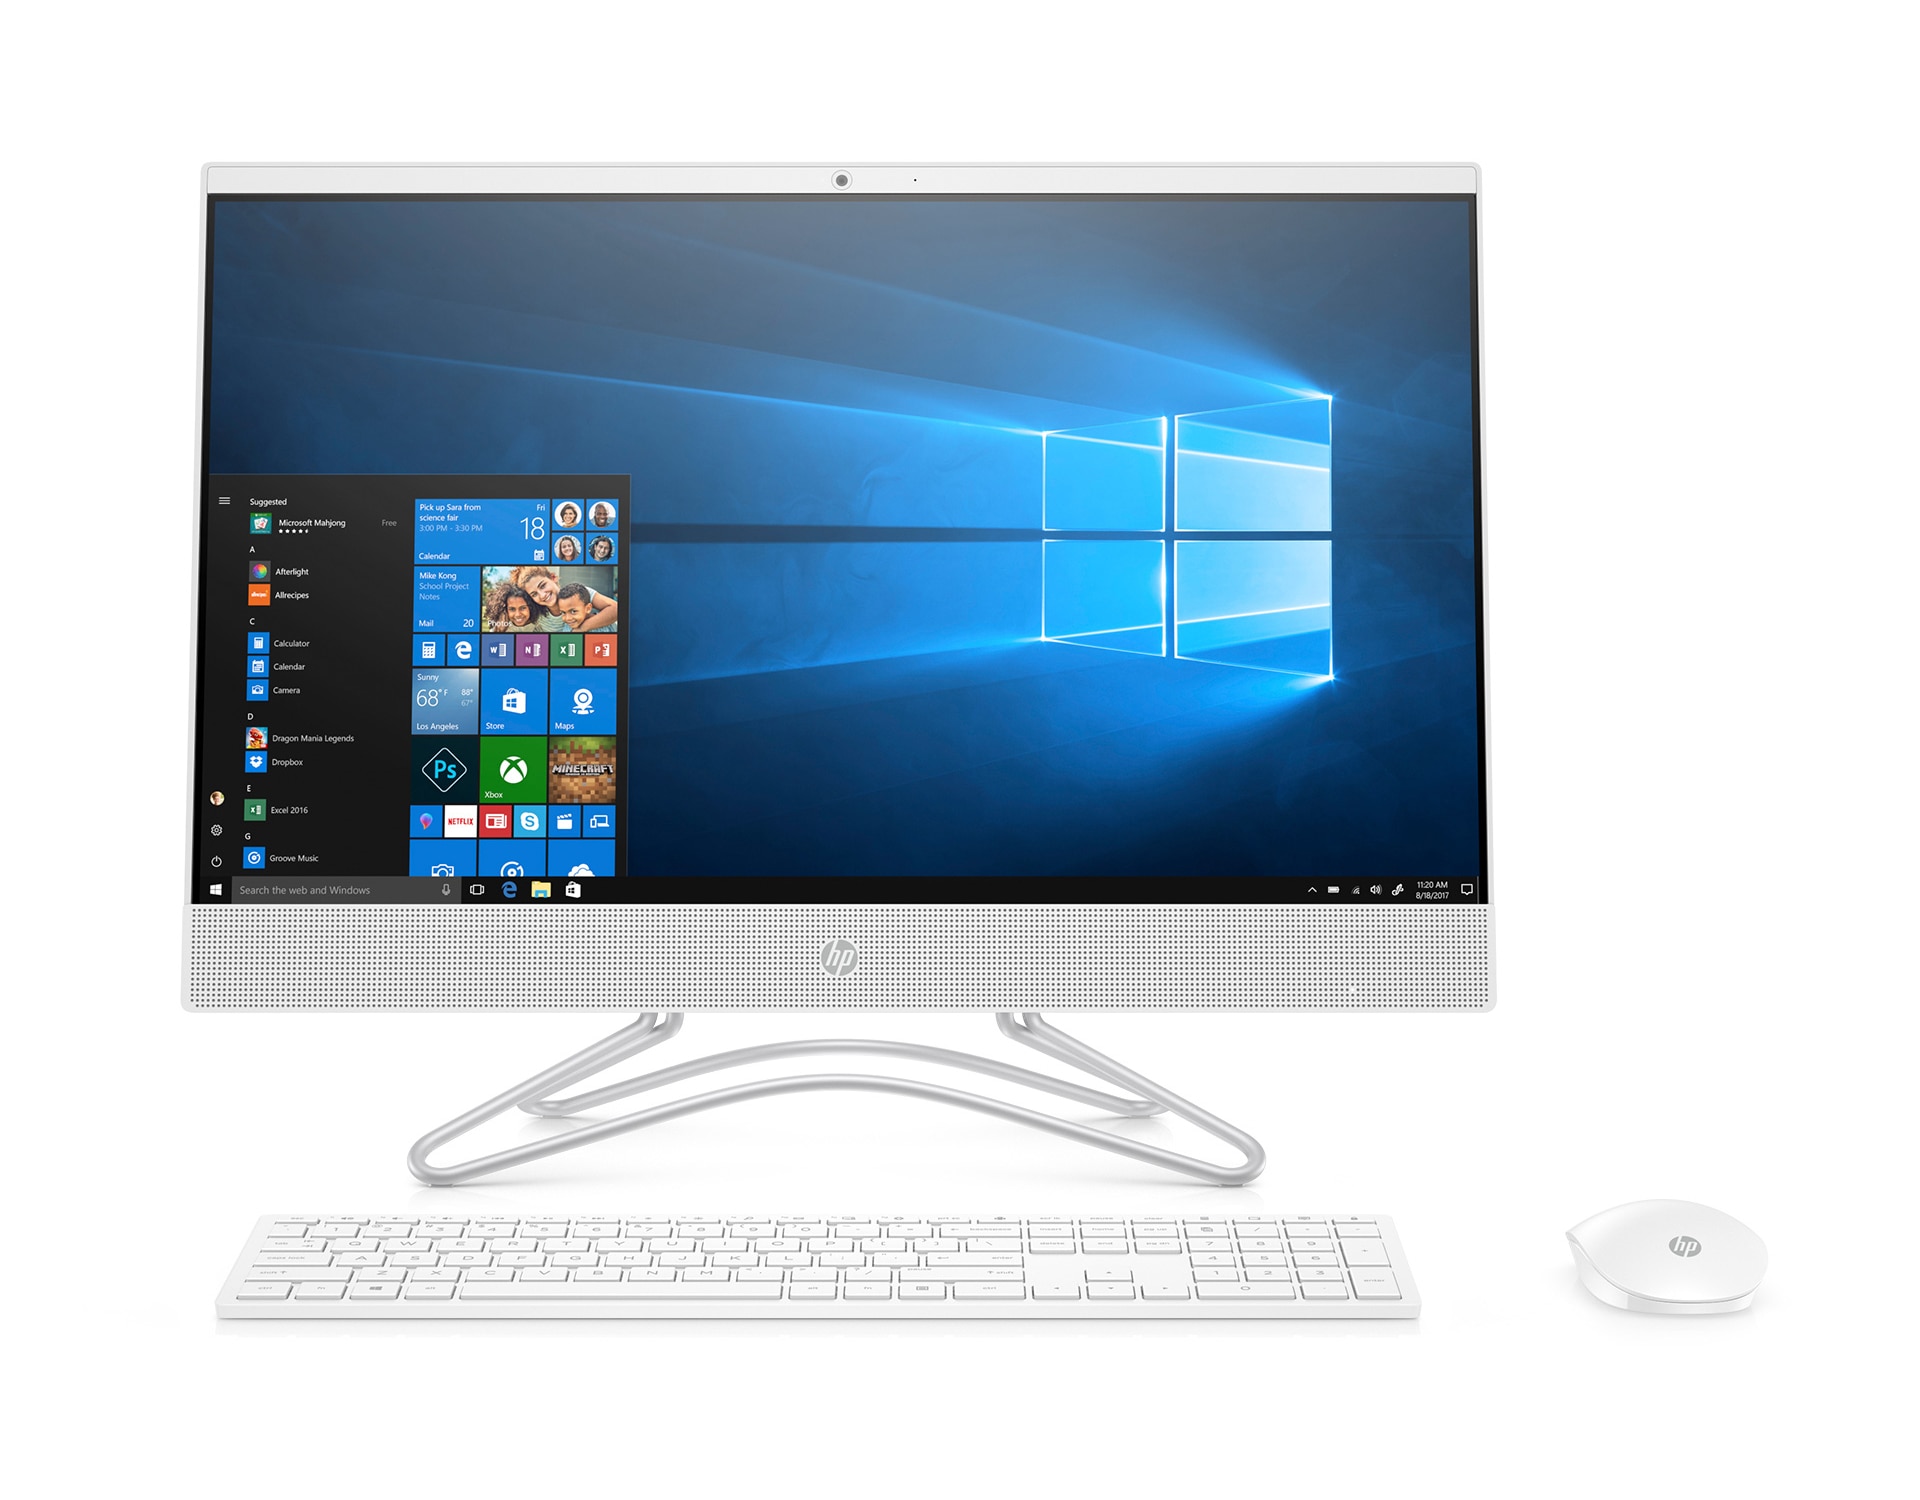 HP All-in-One 24